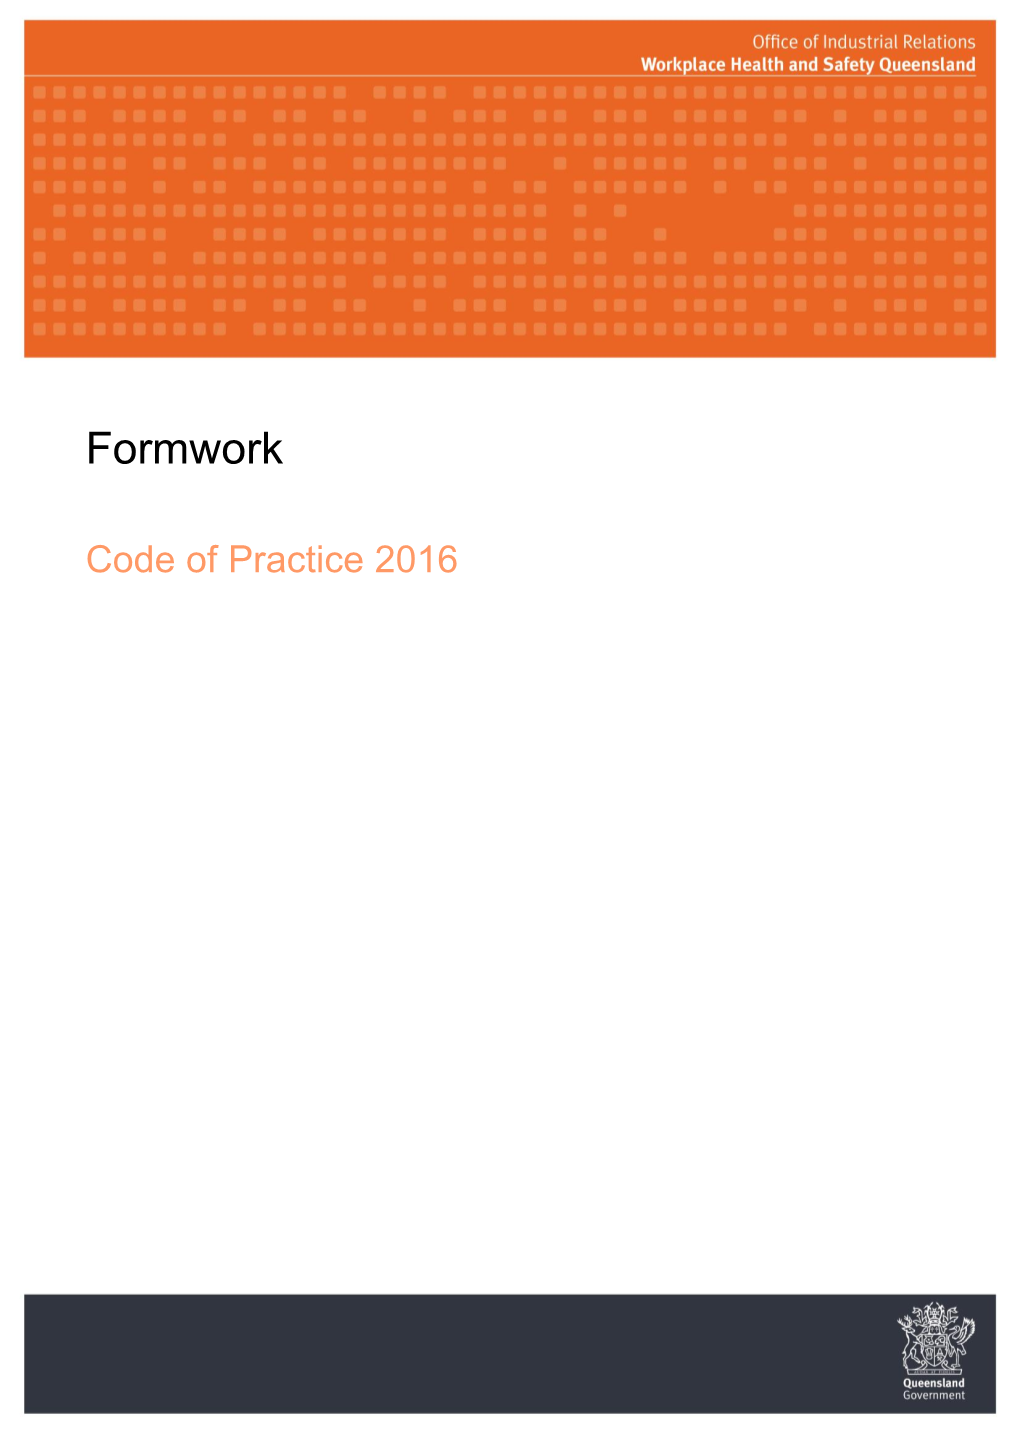 Formwork Code of Practice 2016 (PN11965) Page 2 of 54 Contents 1 Introduction 6 1.1 What Is Formwork?